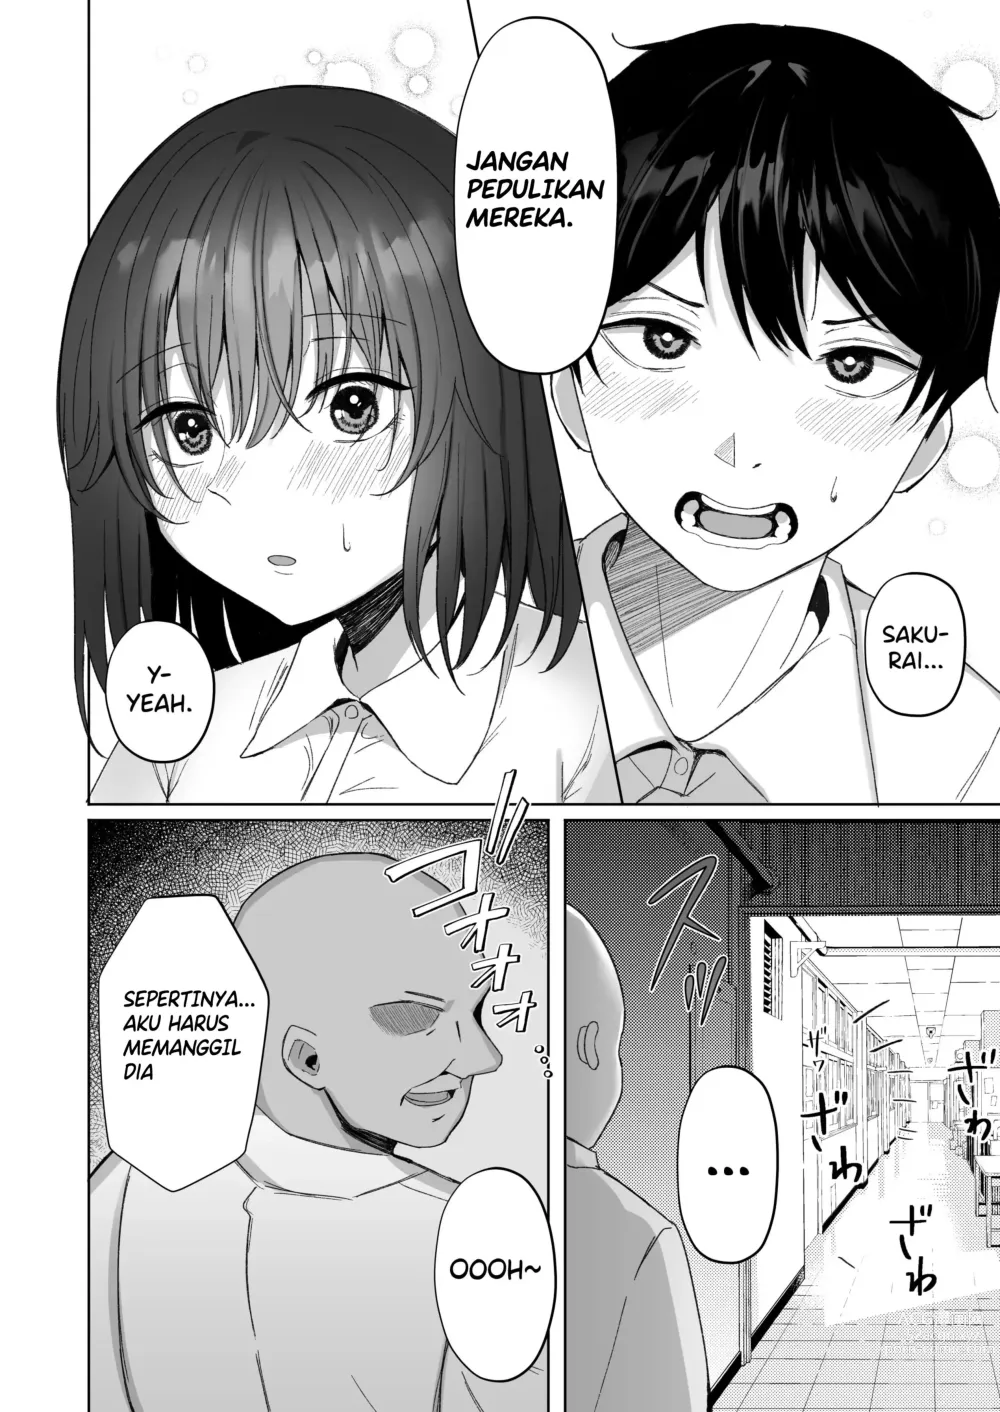 Page 6 of doujinshi Netorare Black-Haired Girl's Suffering